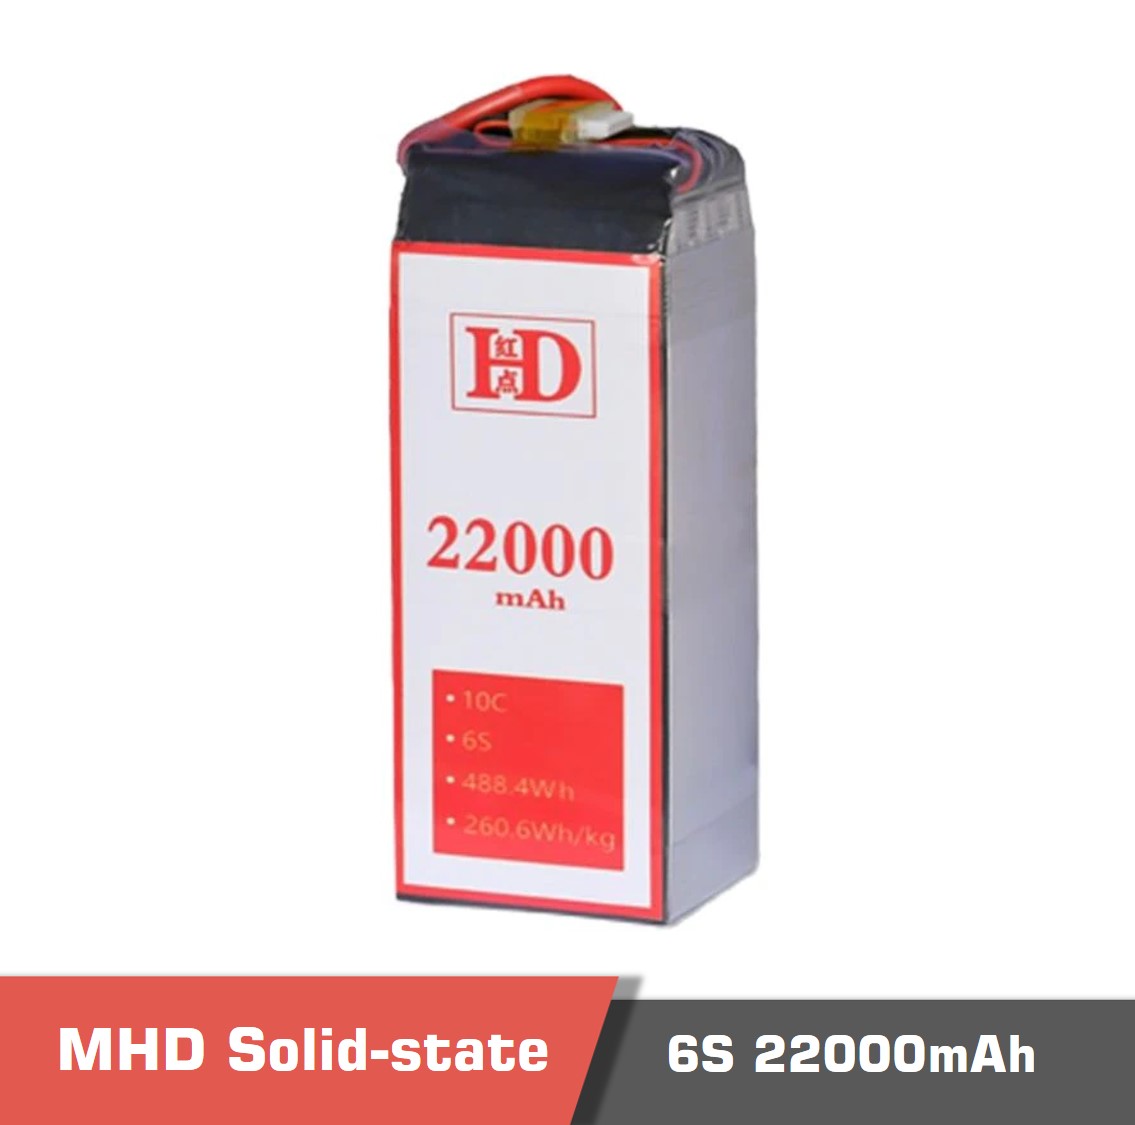 MHD Battery, New Technology Solid-state Li-ion Battery 22000mAh 6s